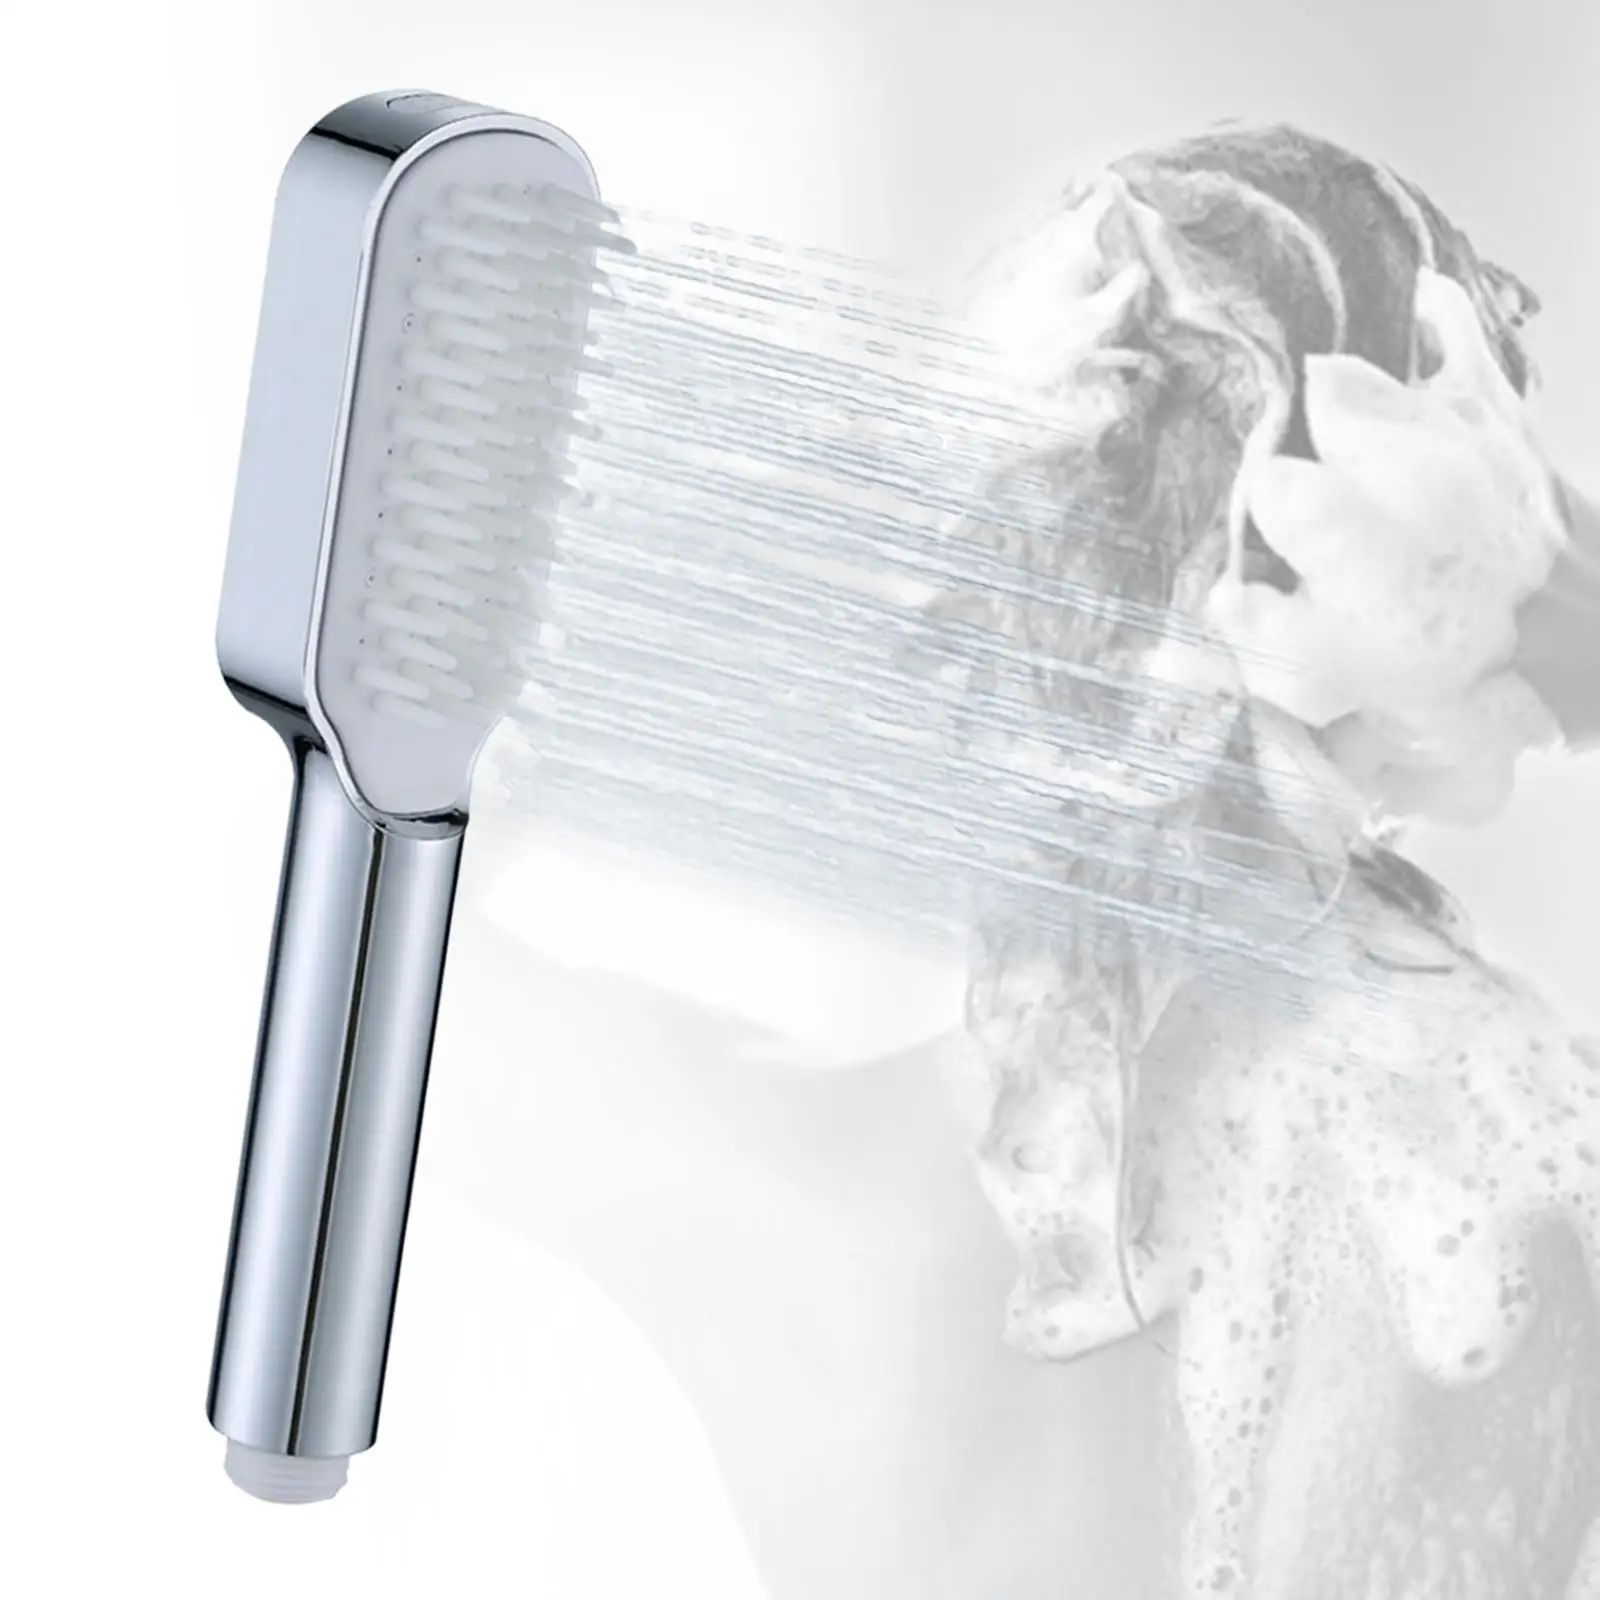 with Massage Combs Rainfall Fits 1/2inch Adapter Saving Water Cleaning Your Shower, Bathroom Accessory